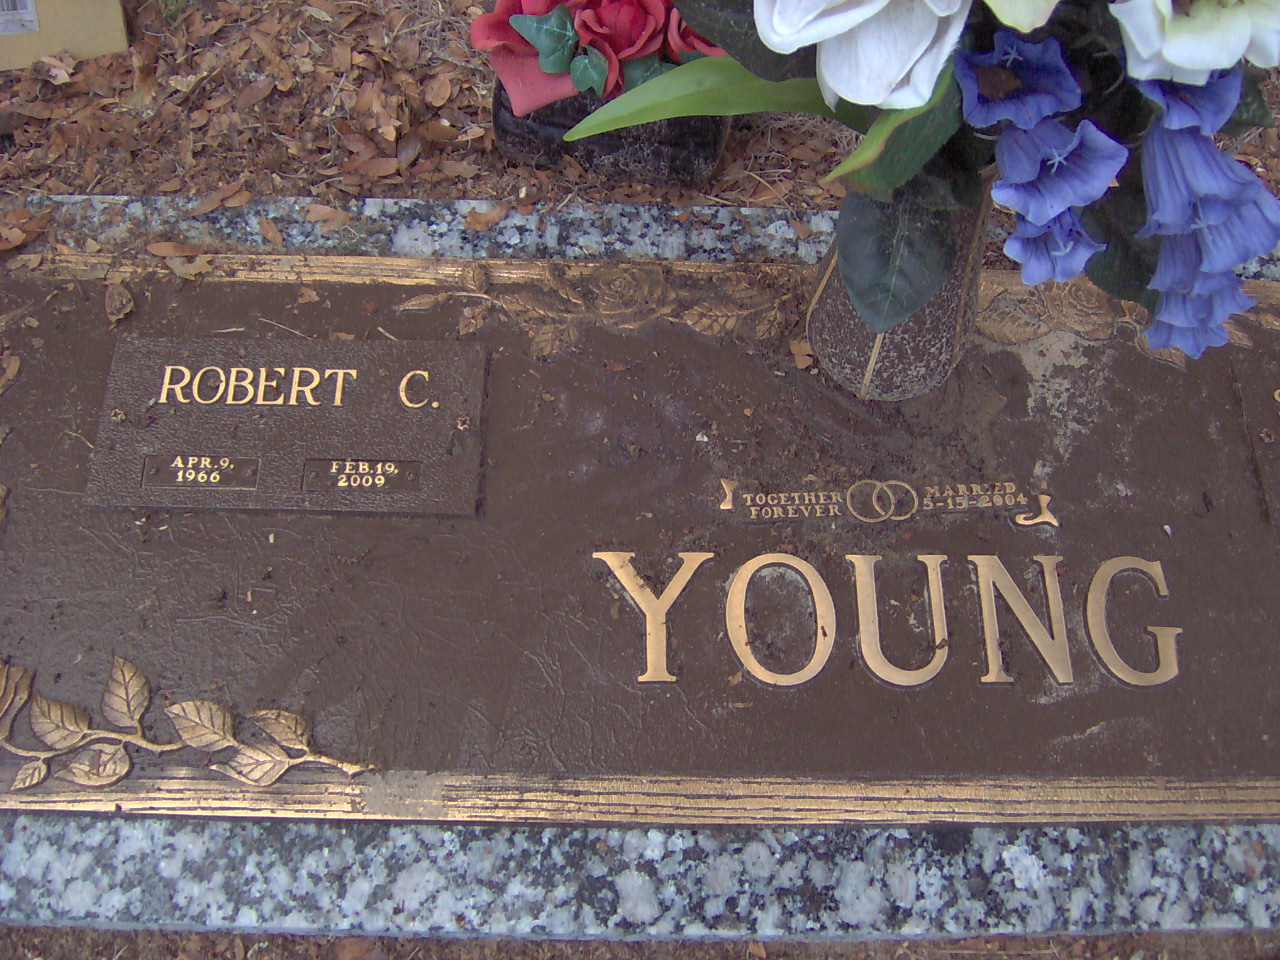 Headstone for Young, Robert C.